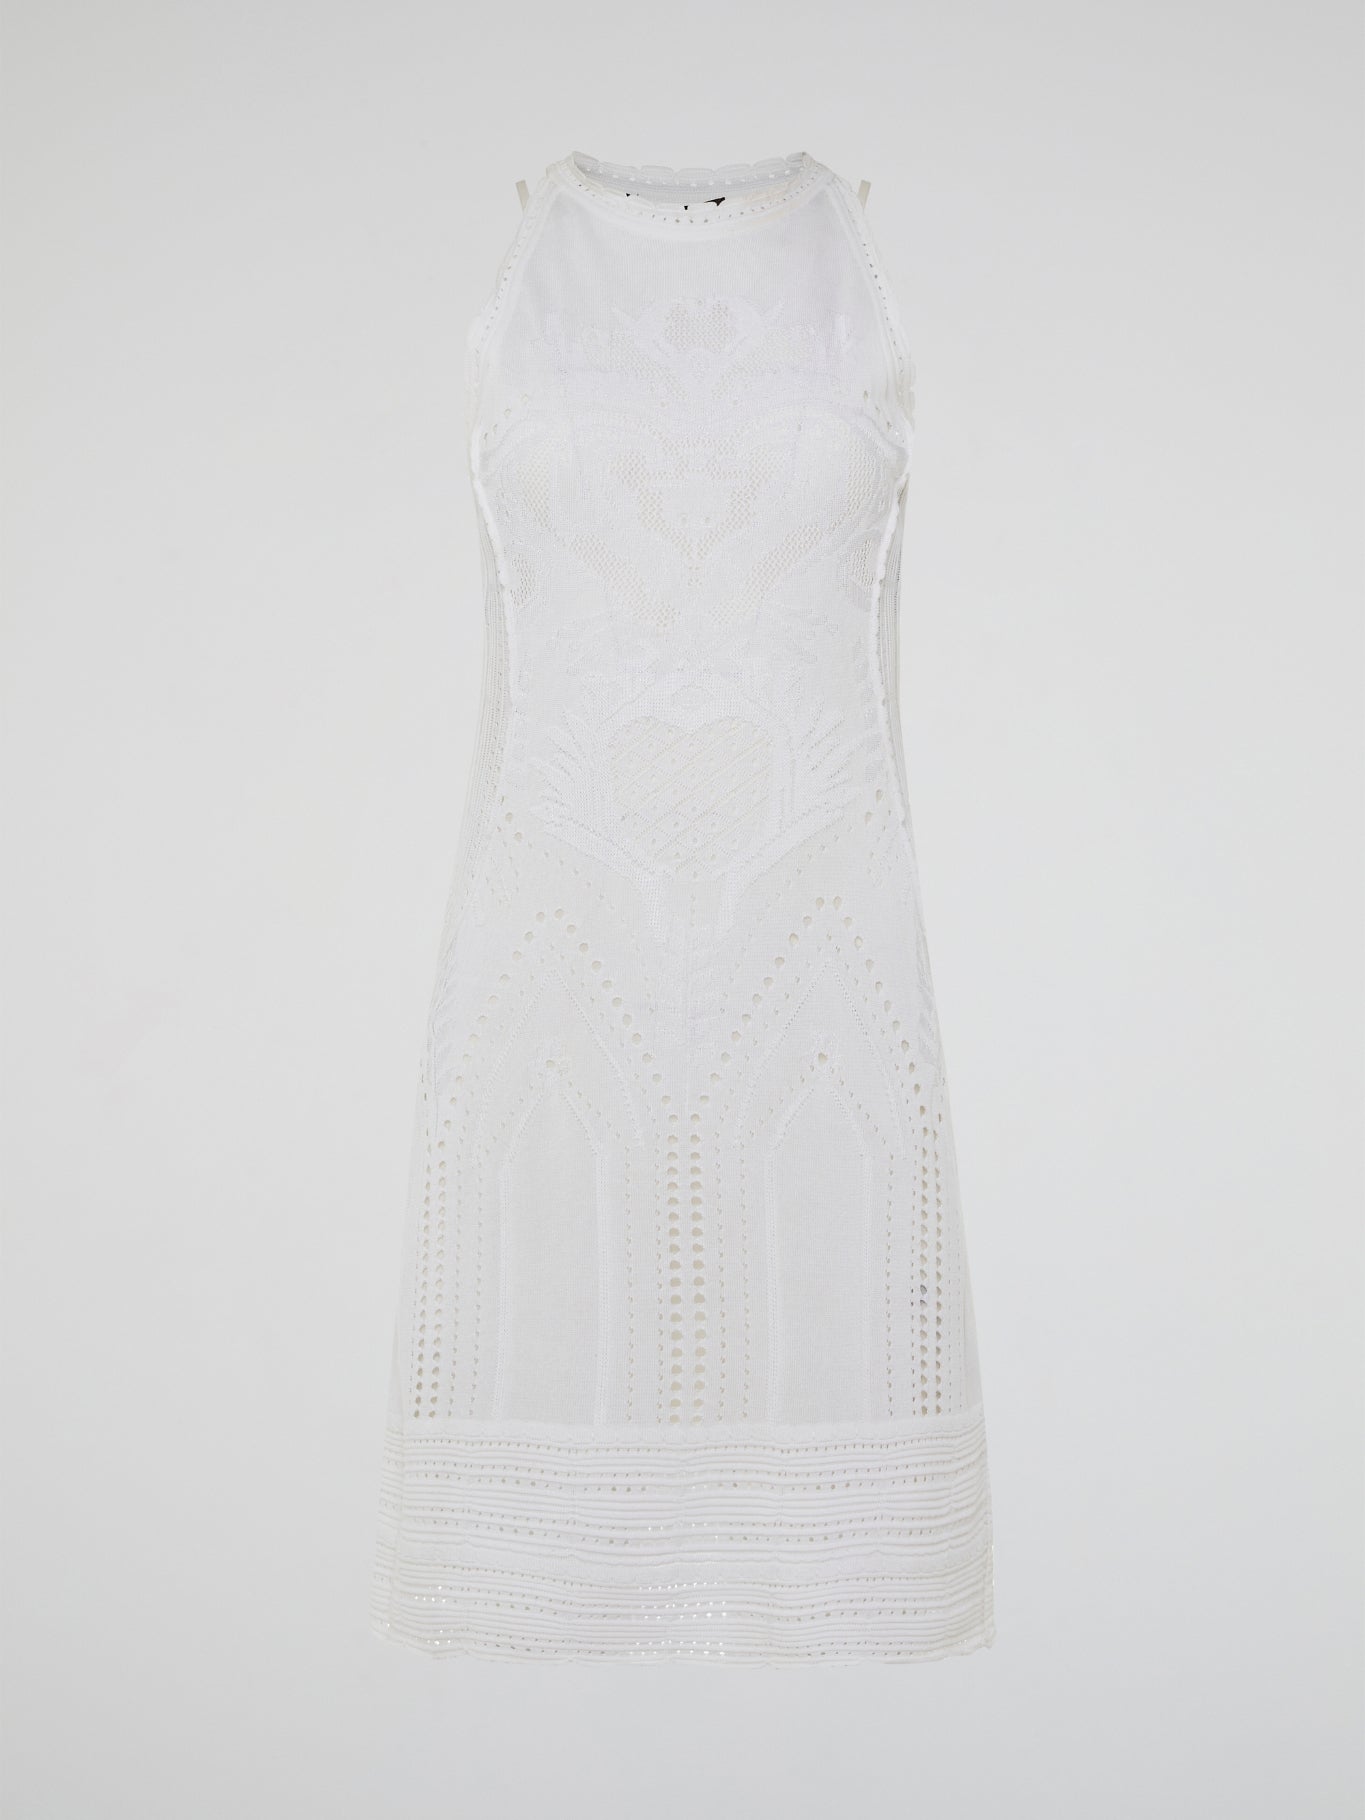 Dance into shimmering moonlit nights in the ethereal beauty of the White Knitted Sleeveless Dress by Roberto Cavalli. Crafted with meticulous artistry, this exquisite dress features delicate knitted patterns that seamlessly cascade down your curves, creating an enchanting silhouette. With its timeless elegance and romantic charm, this dress is a masterpiece that exudes pure grace and allure.